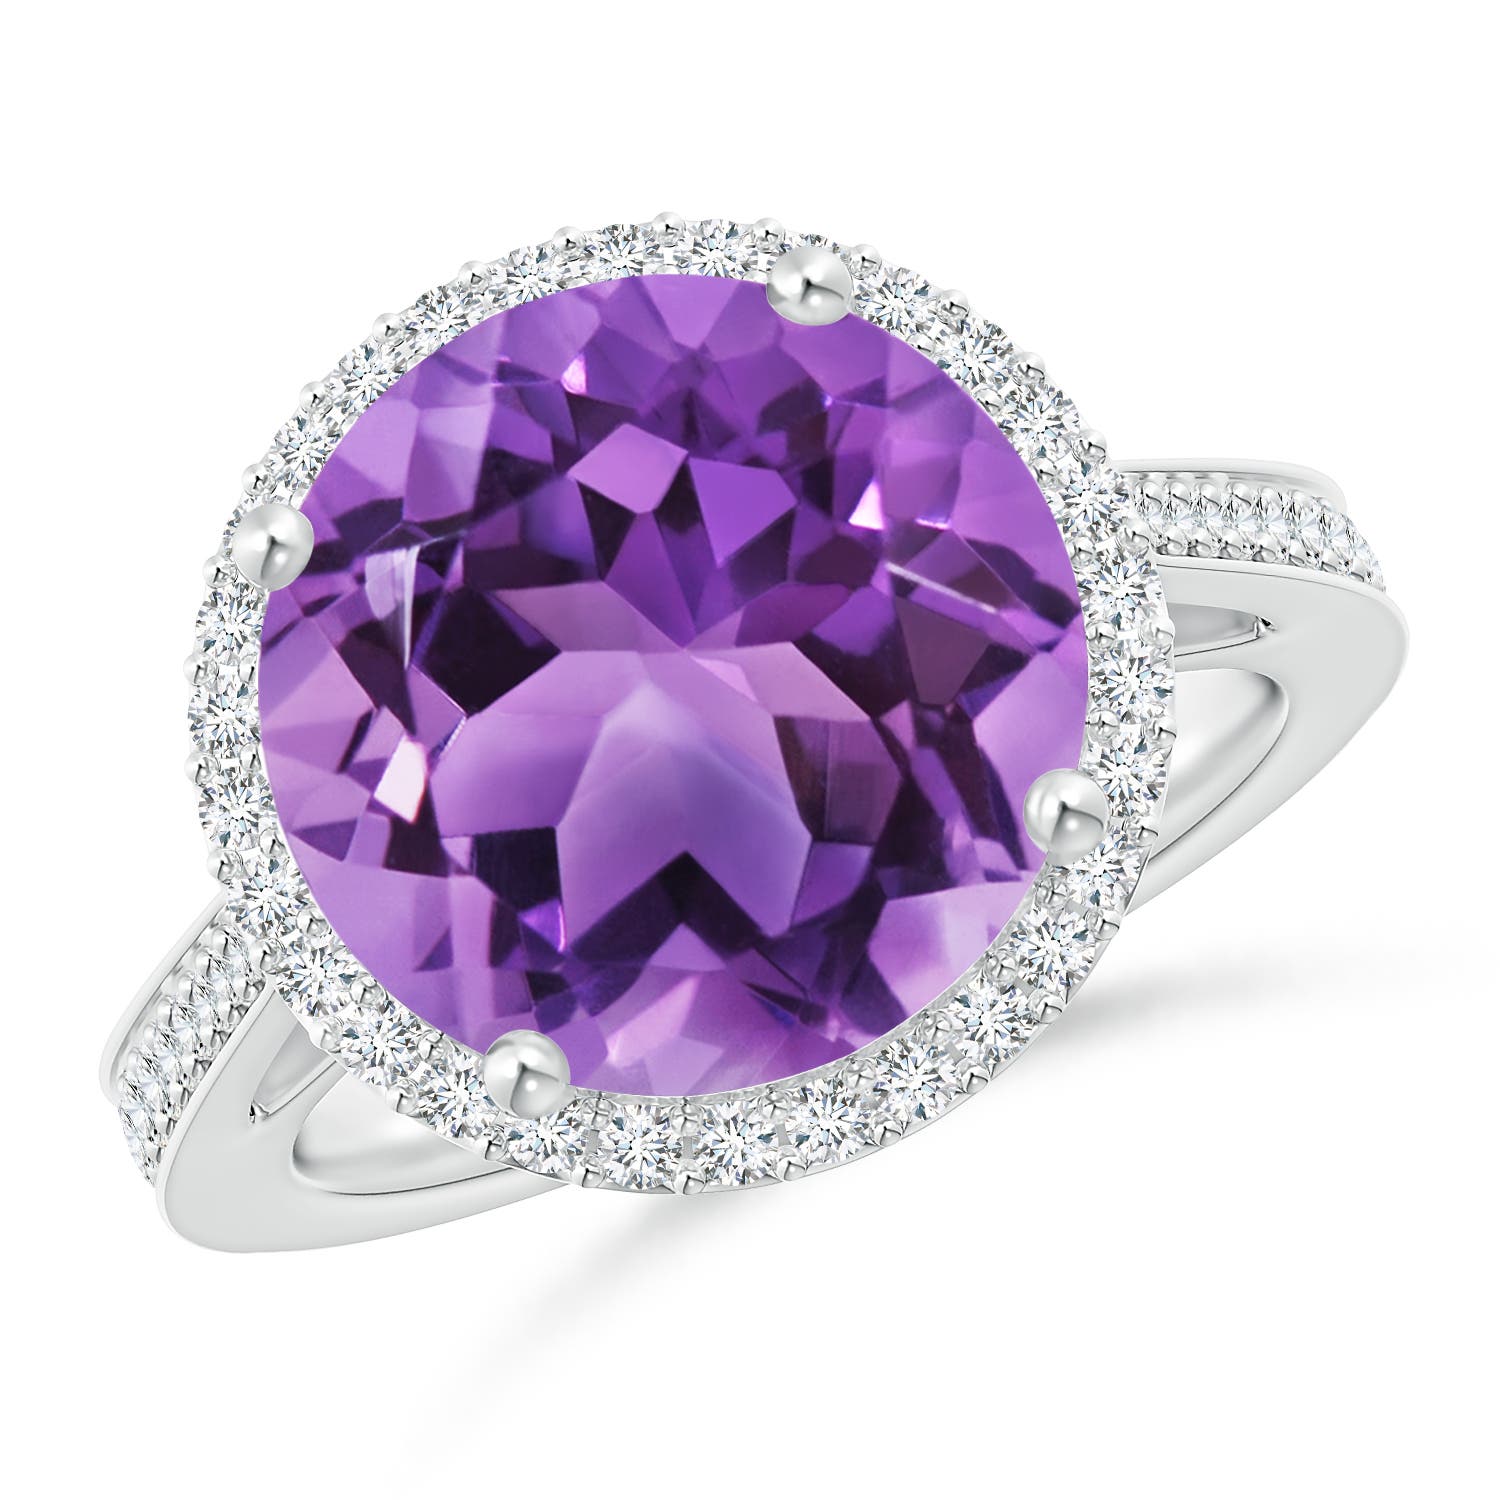 AA - Amethyst / 5.94 CT / 14 KT White Gold